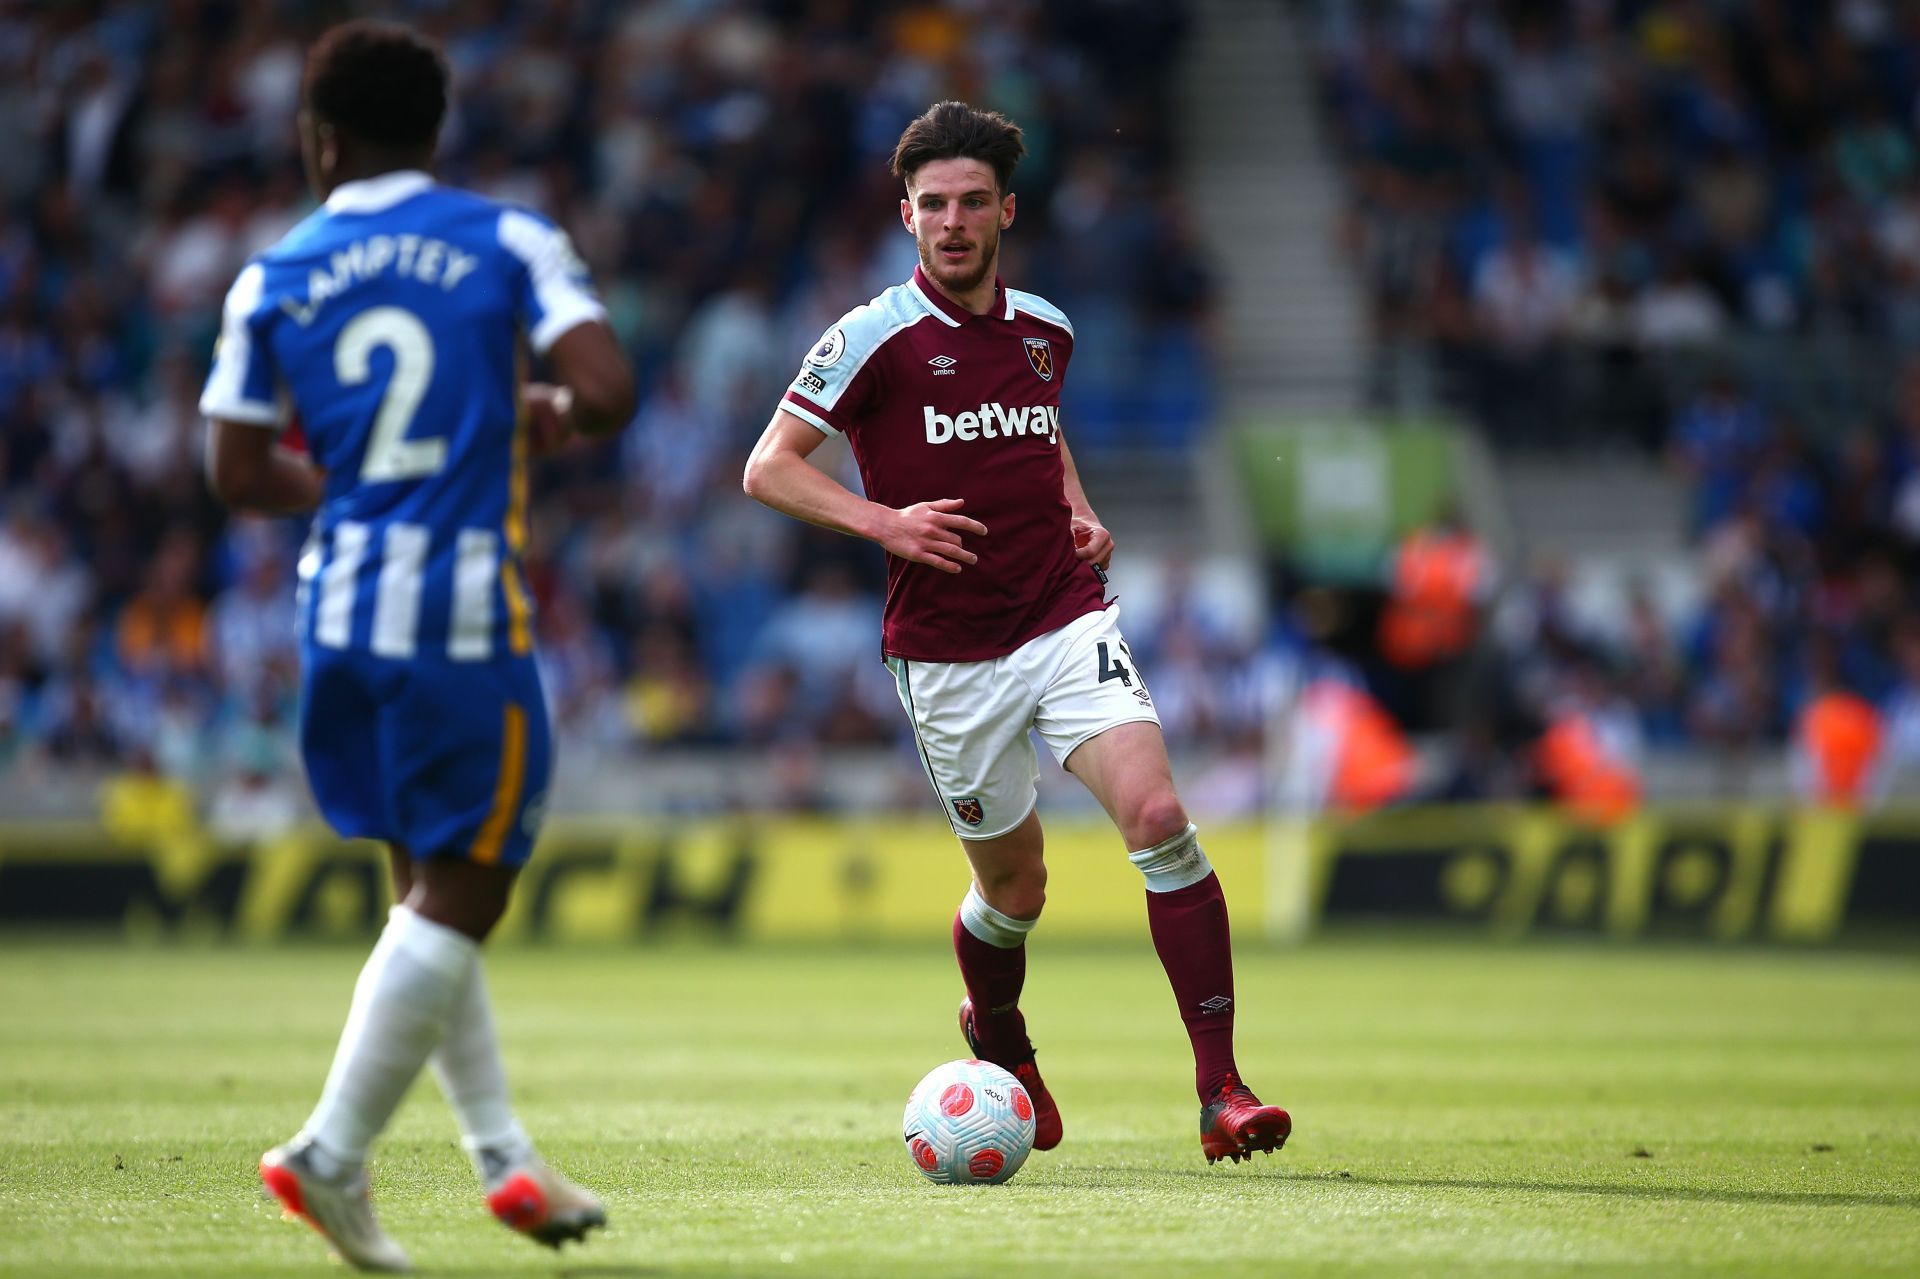 Declan Rice has been in top form for West Ham United recently